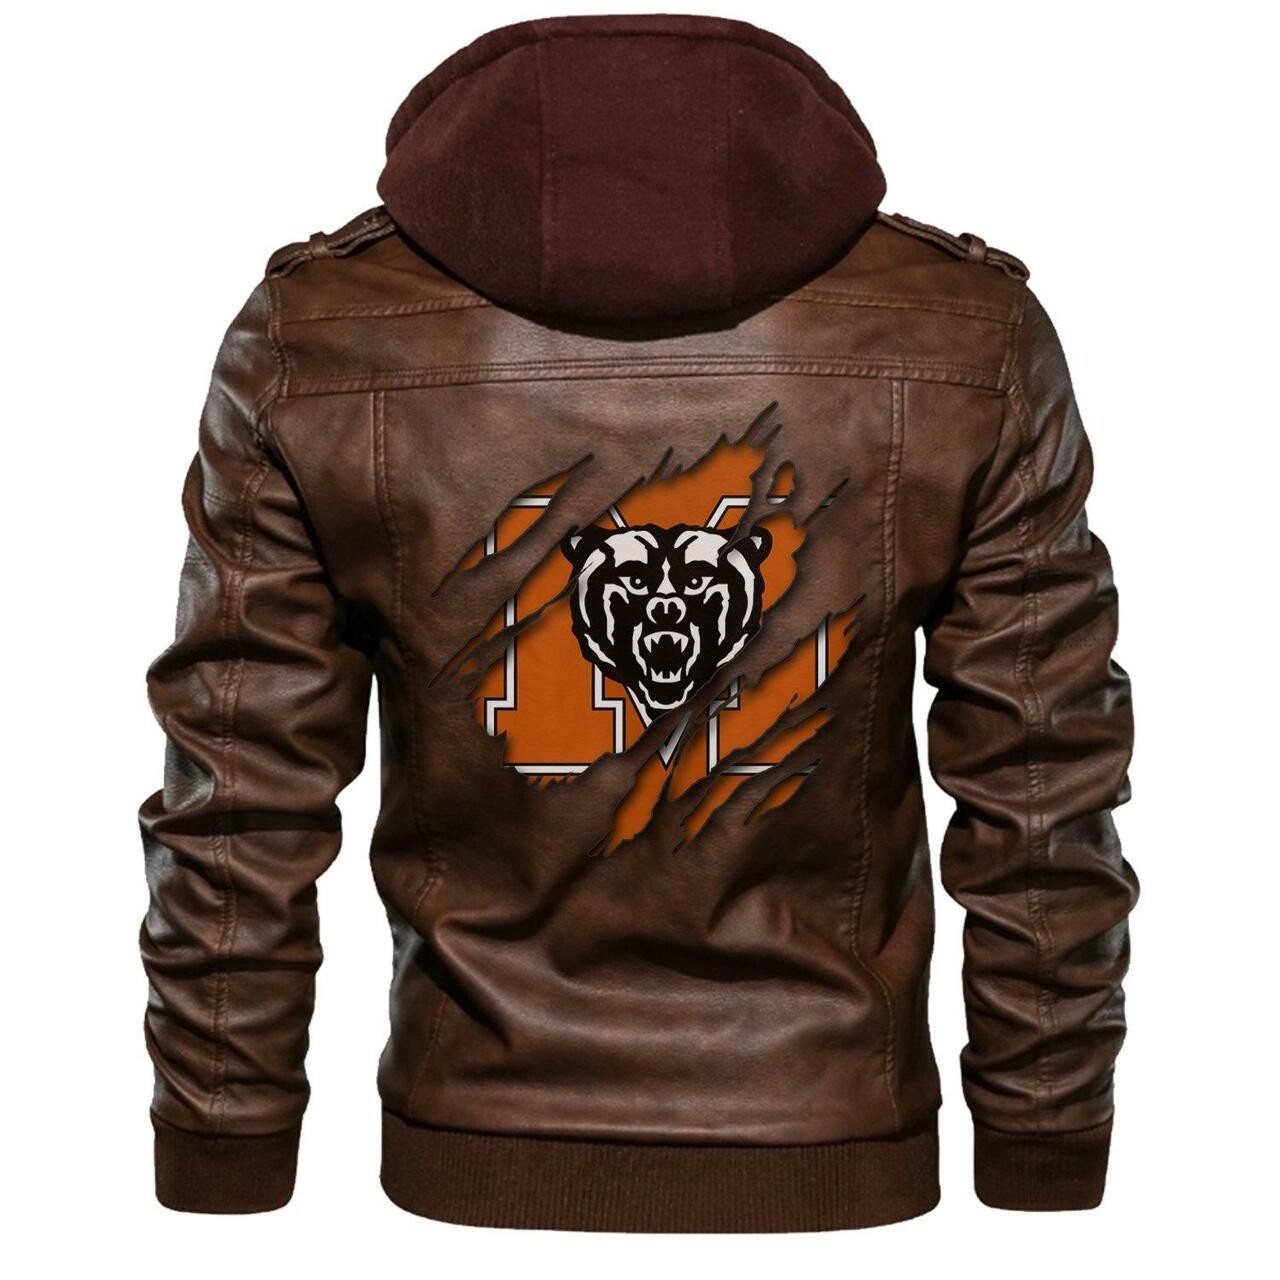 Check out and find the right leather jacket below 129